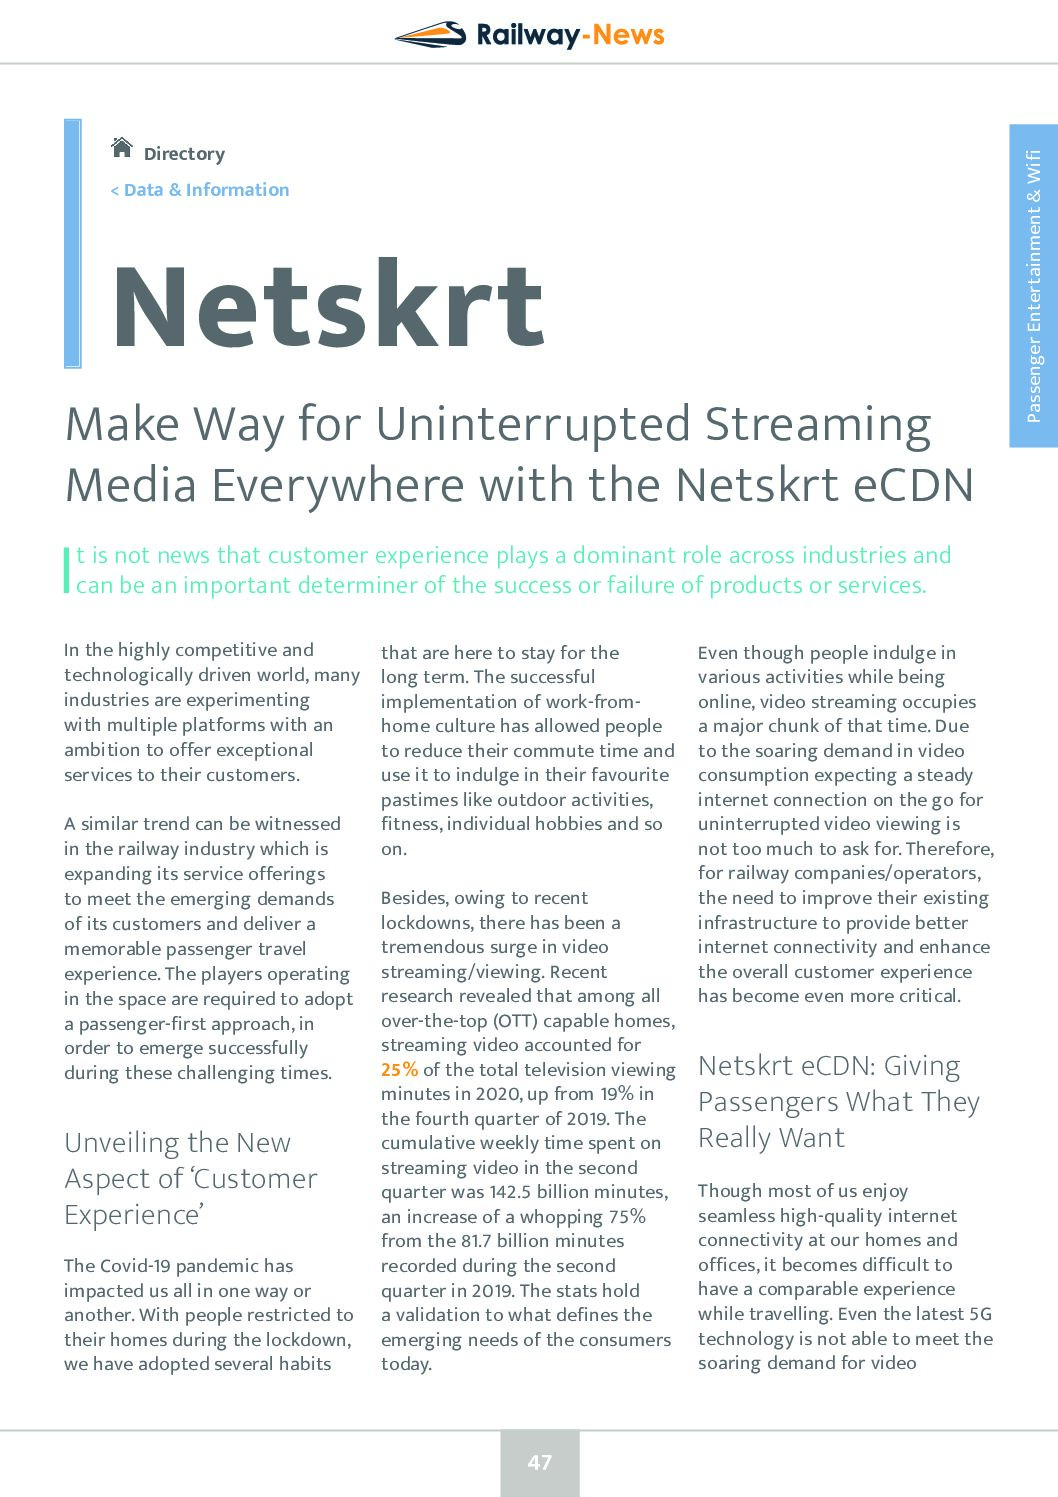 Make Way for Uninterrupted Streaming Media with the Netskrt eCDN